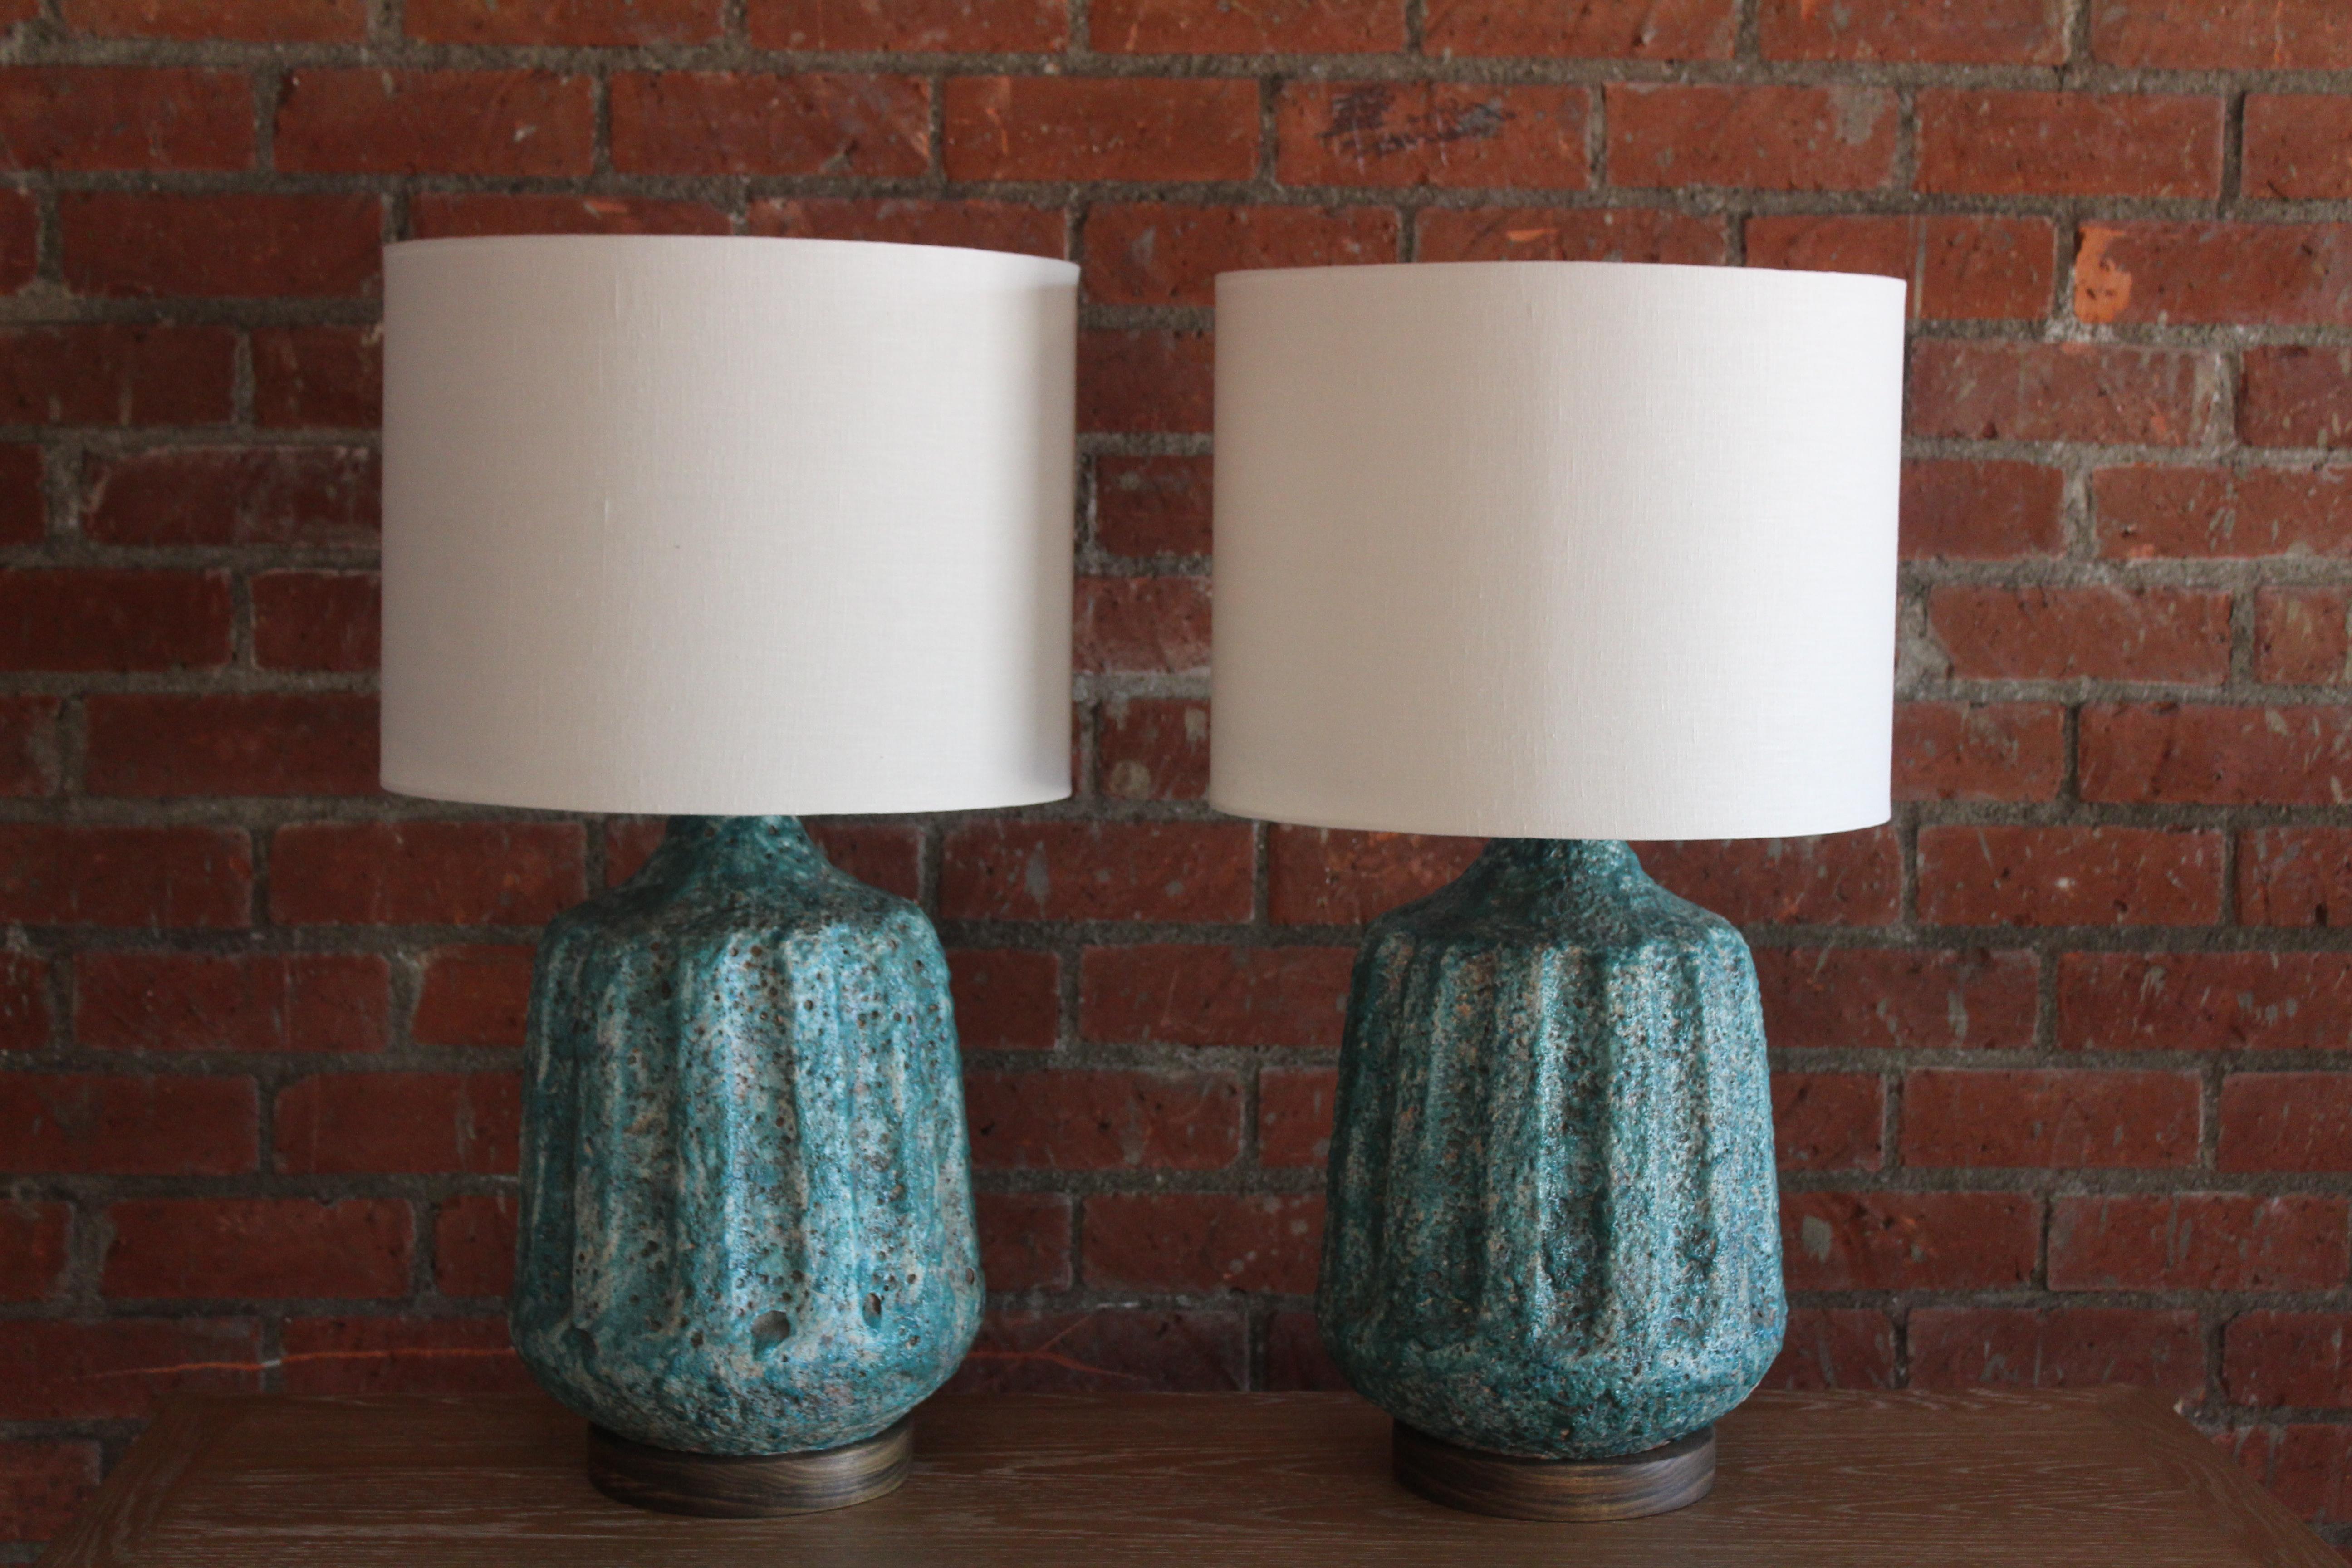 Pair of vintage 1960s Italian lava glazed ceramic lamps. Newly rewired and fitted with custom made shades in Belgian linen. New bases in walnut. Sold as a pair. 
Measures: 15